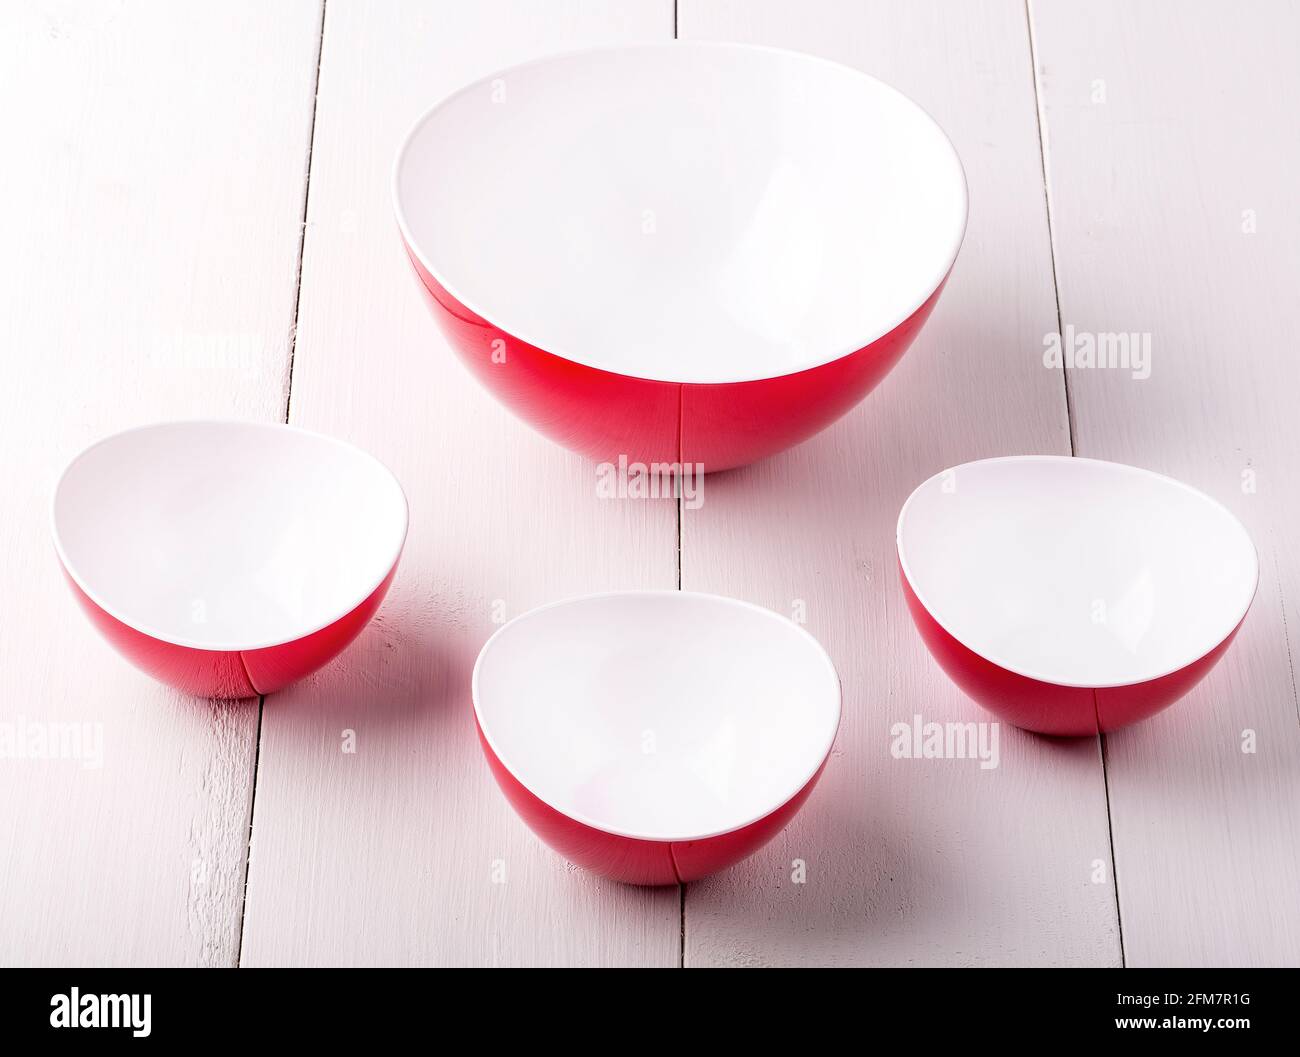 https://c8.alamy.com/comp/2FM7R1G/an-empty-red-salad-bowl-and-three-cups-on-a-white-wooden-table-2FM7R1G.jpg